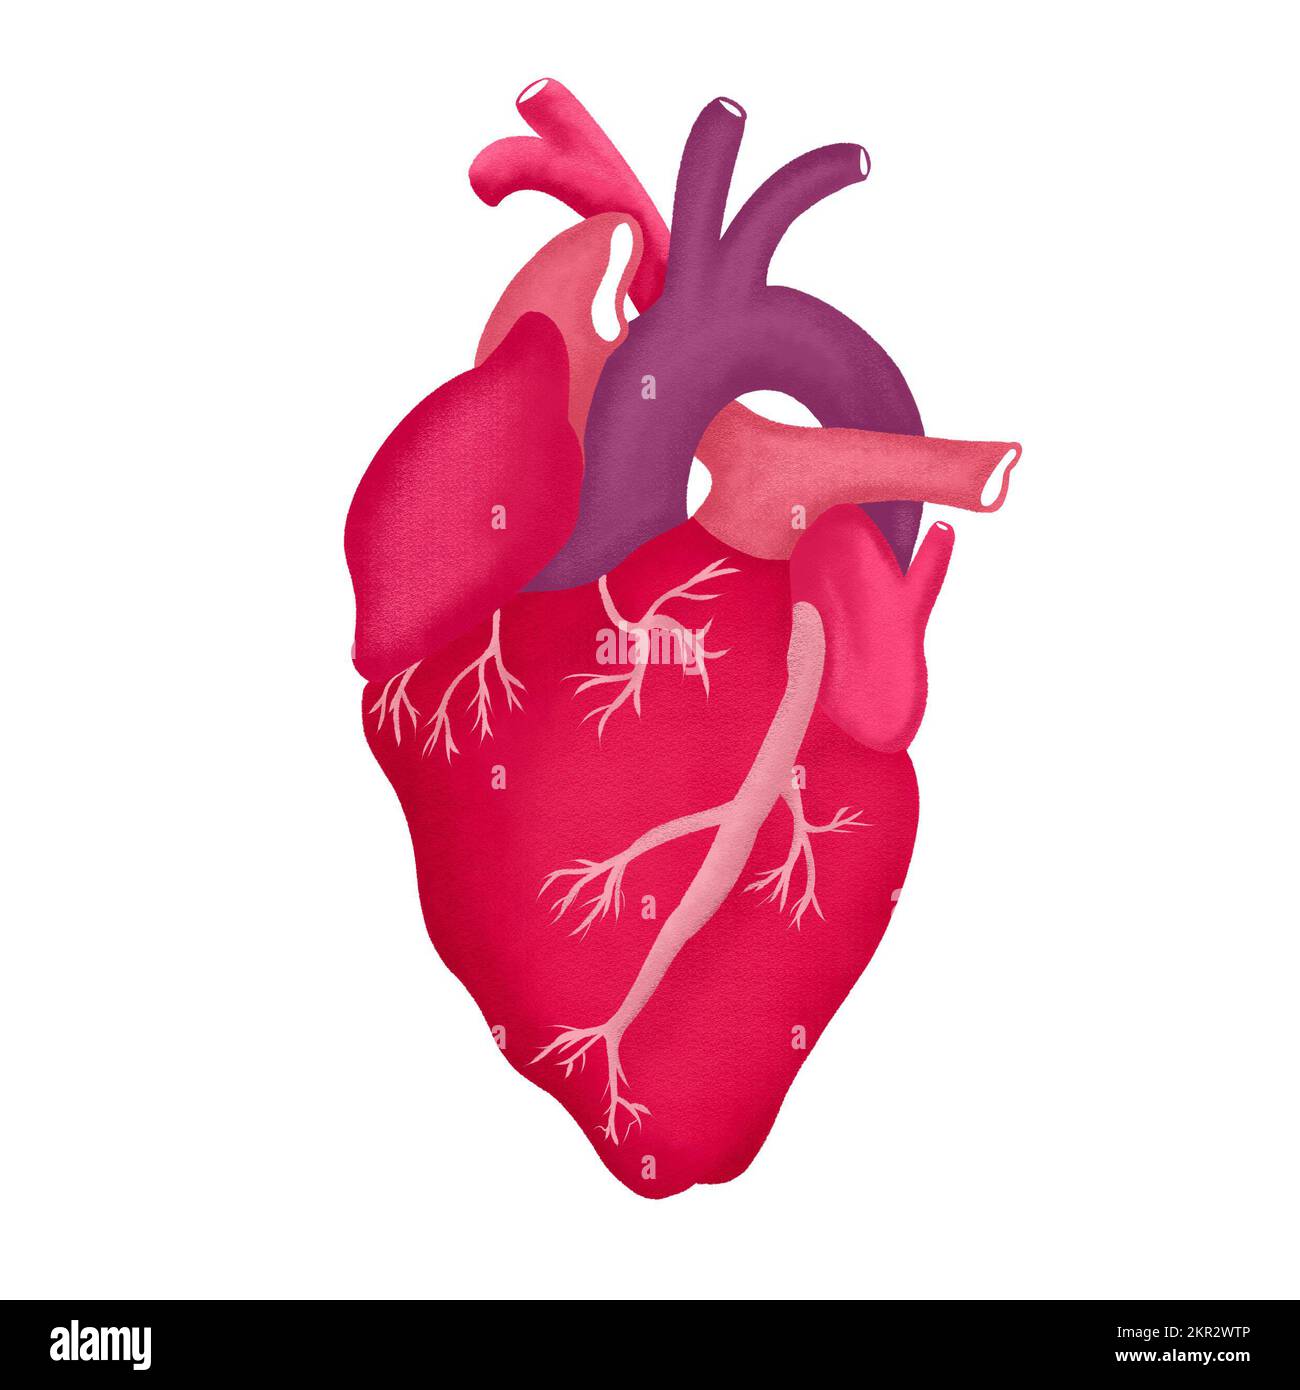 illustration of an anatomical heart Stock Photo